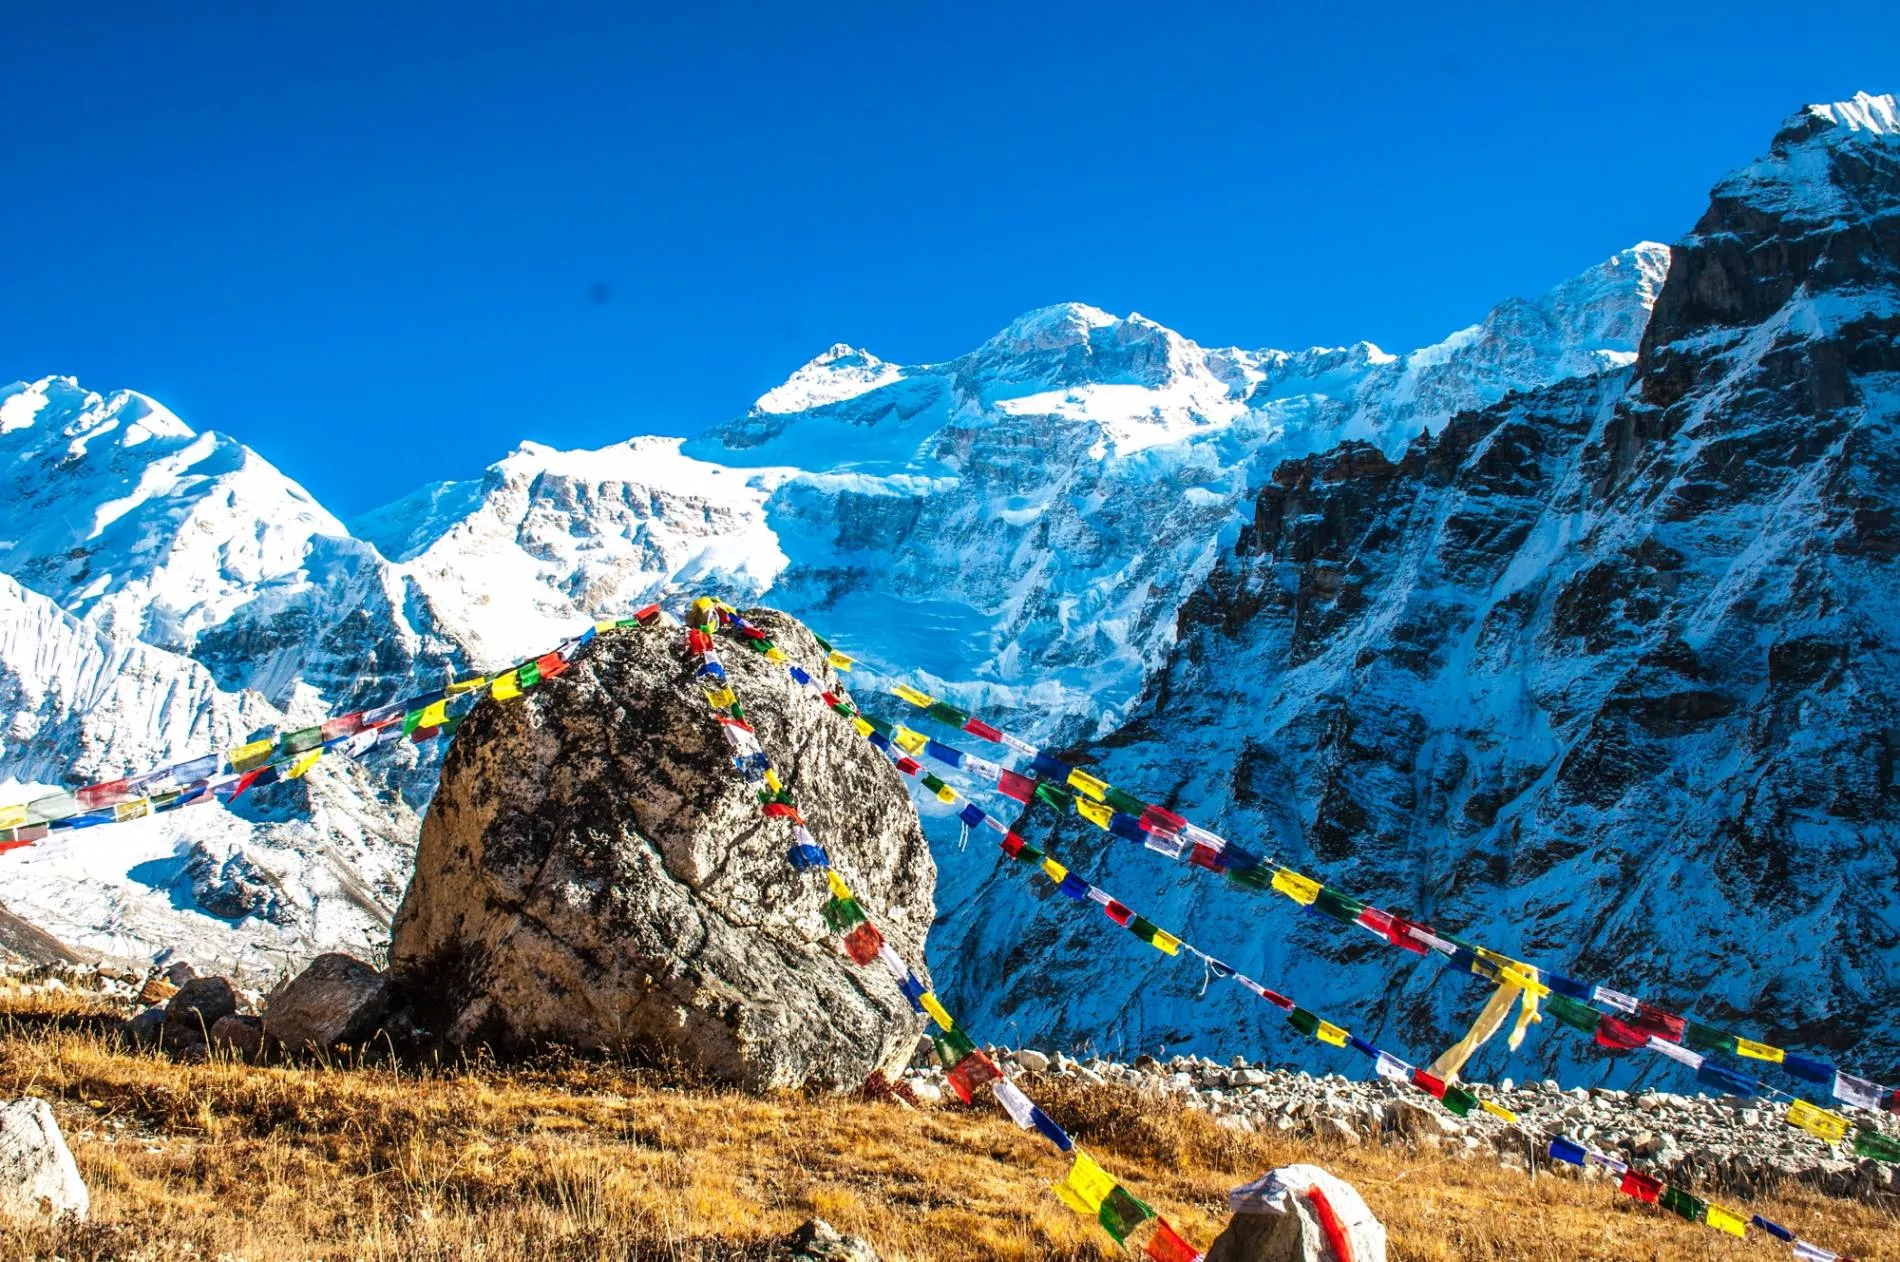 Kanchenjunga Base Camp in India, Central Asia | Trekking & Hiking - Rated 4.1